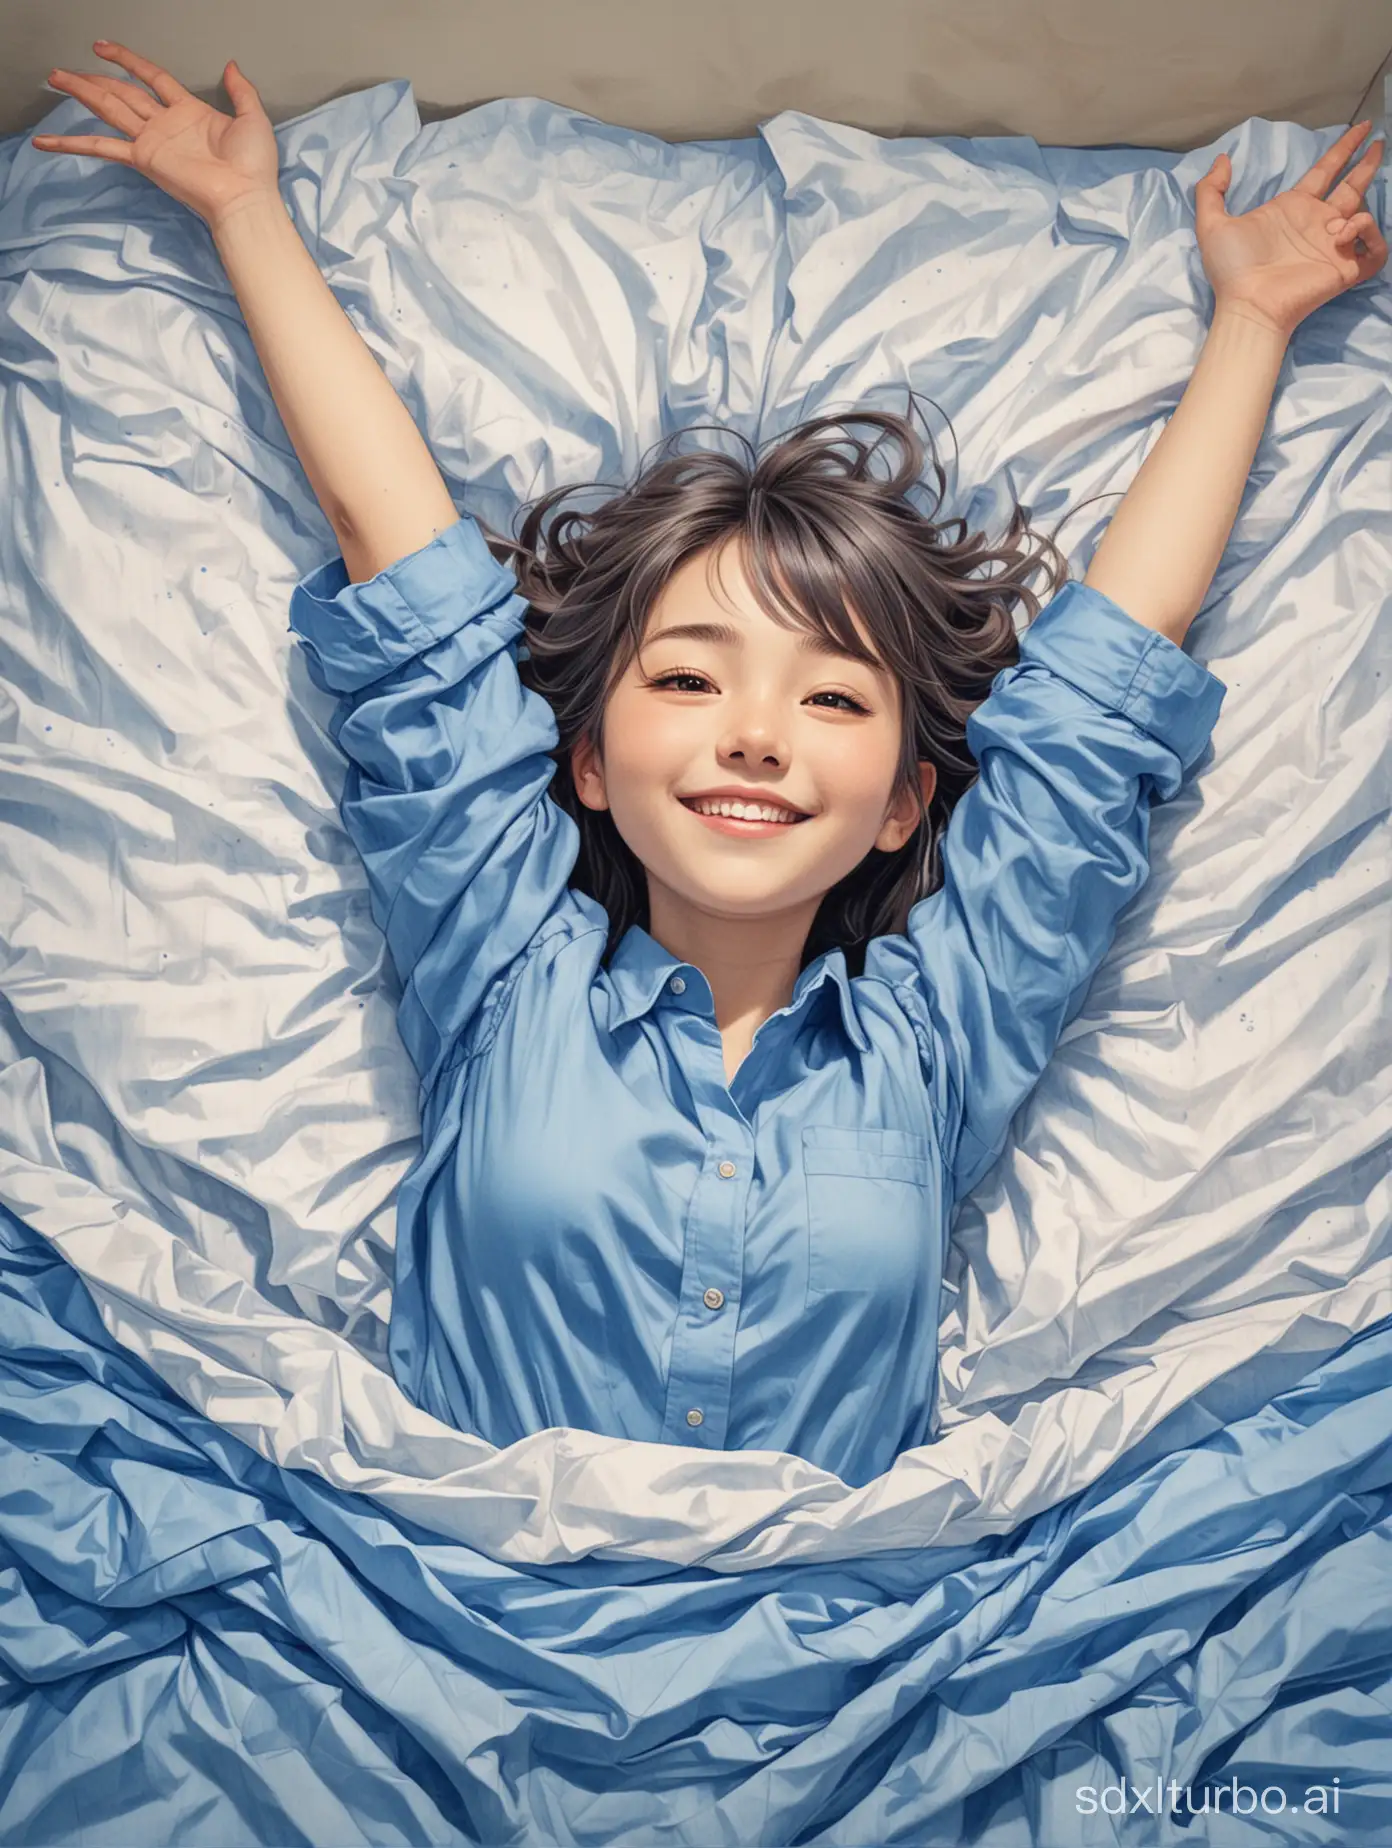 Joyful-Girl-in-Blue-Shirt-on-Artistic-Blue-and-White-Bed